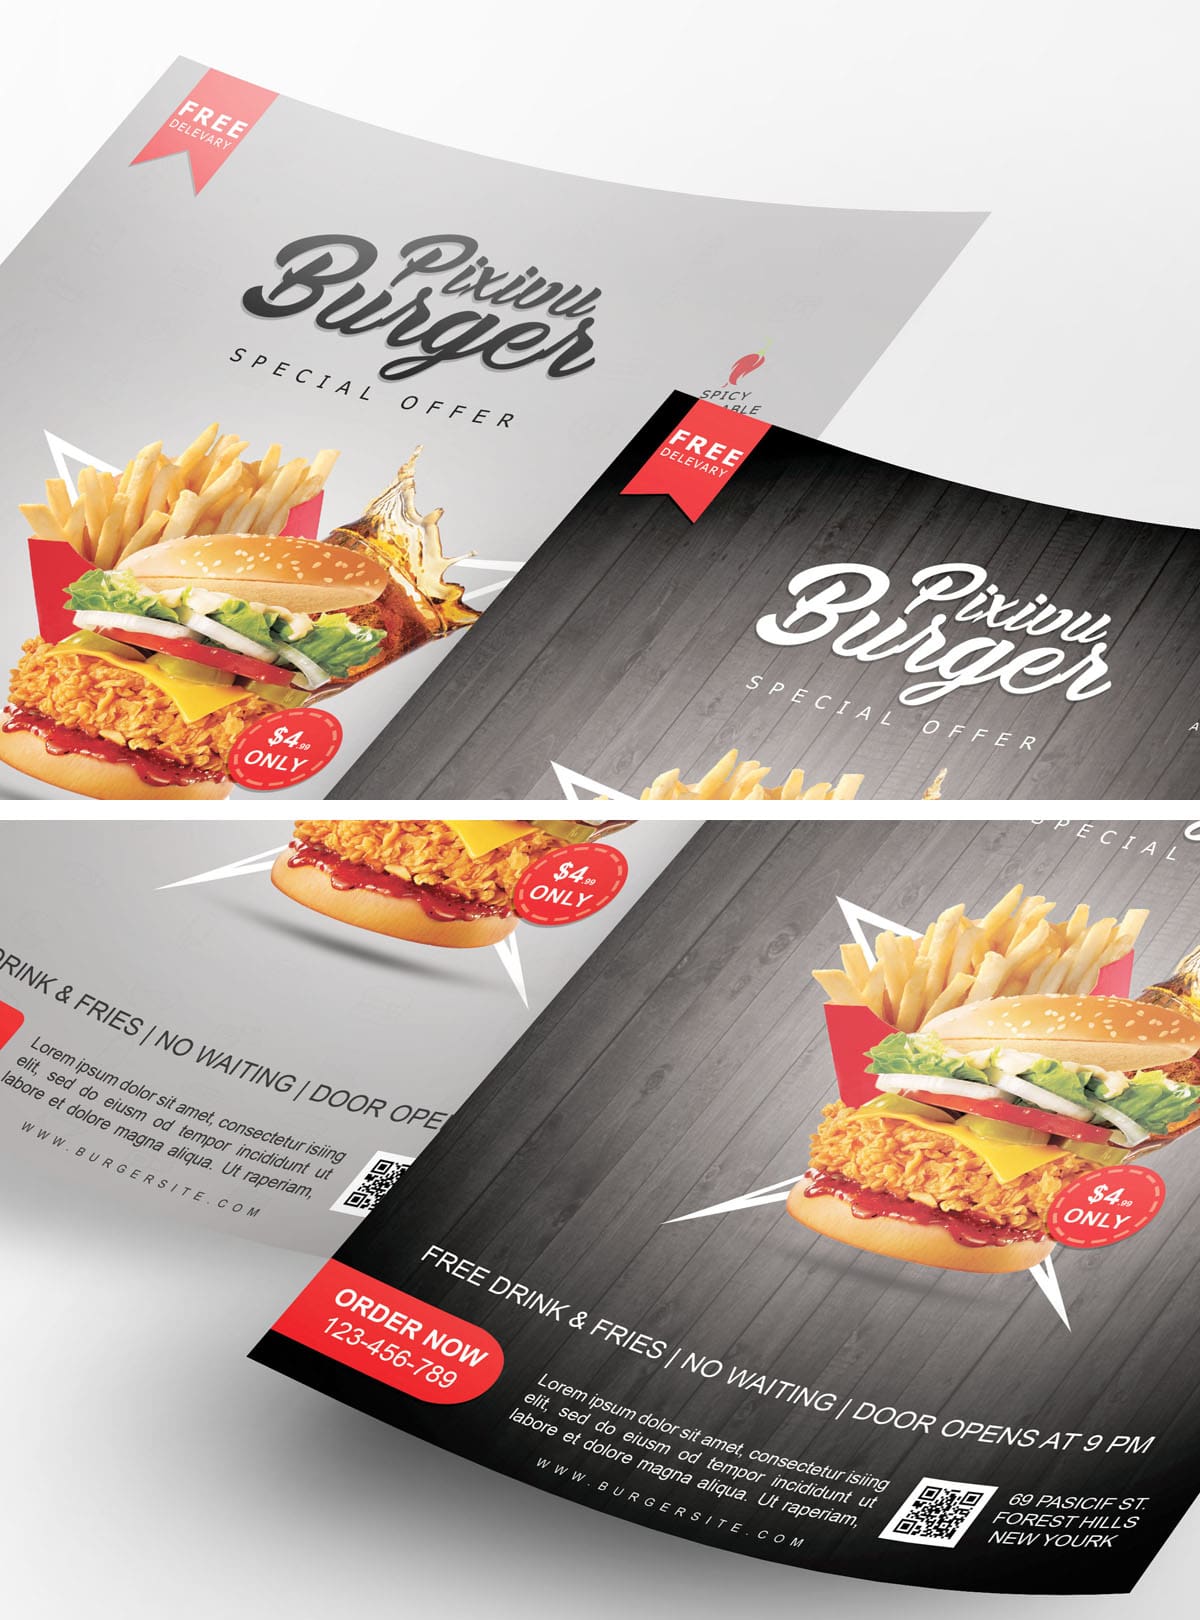 Download Free Professional Flyer PSD Mockup - Find the Perfect ...